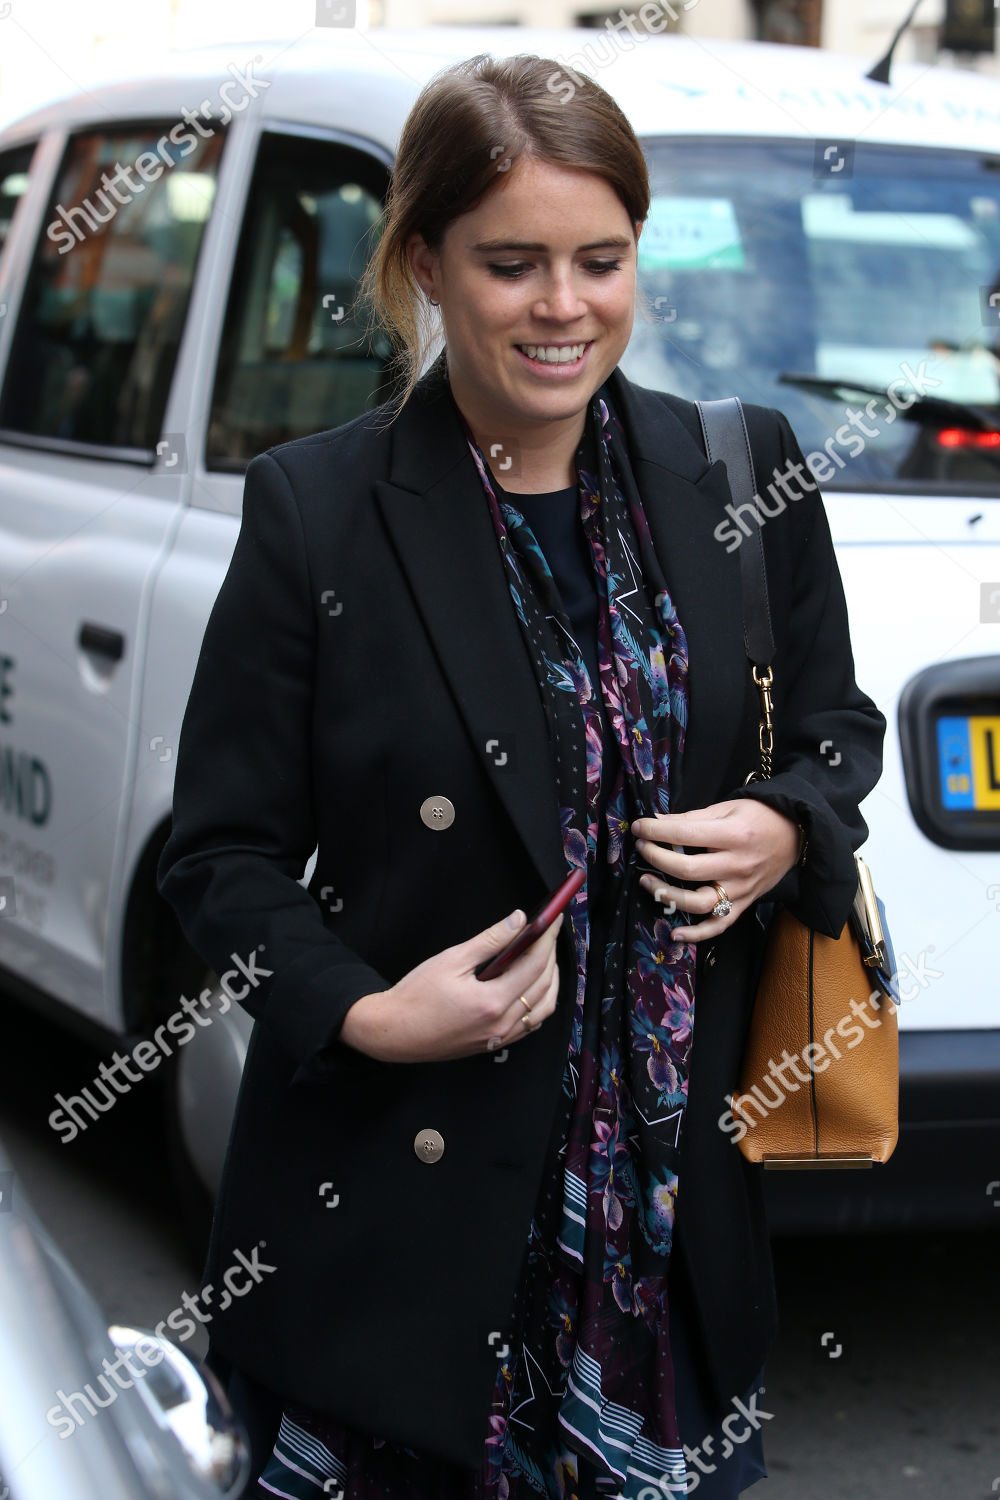 princess-eugenie-out-and-about-london-uk-shutterstock-editorial-10430670f.jpg